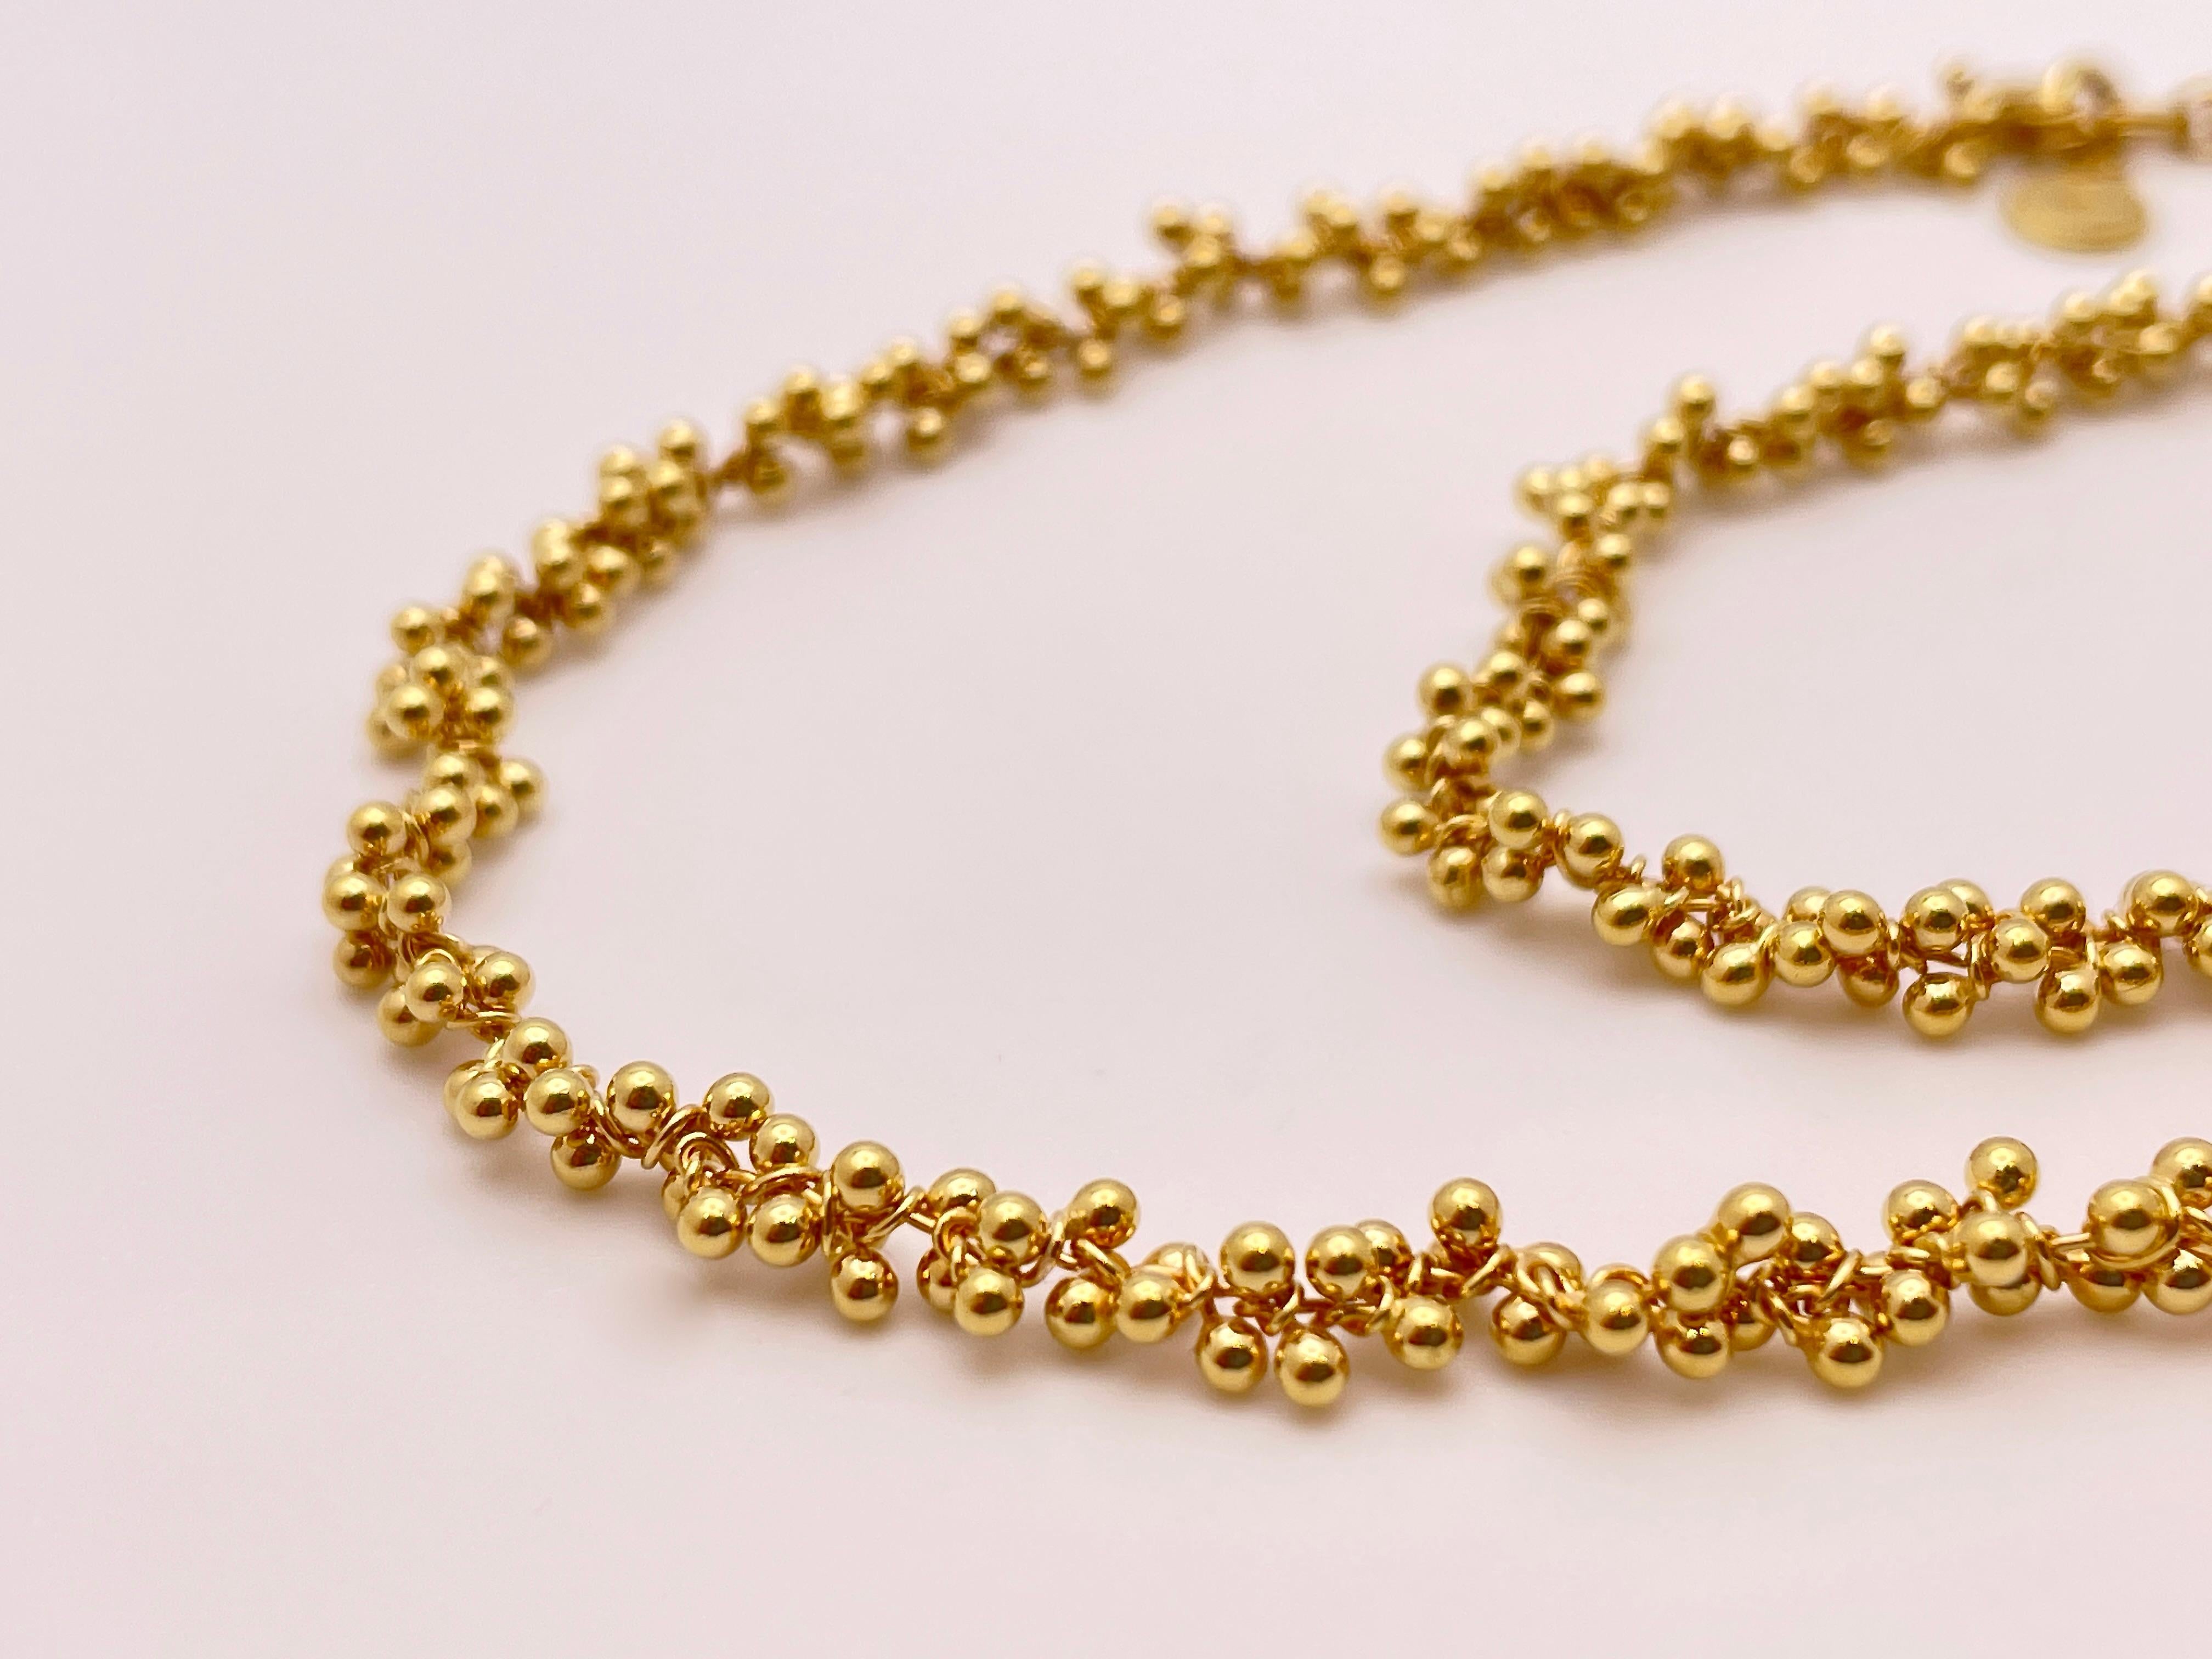 An extraordinary 18K yellow gold signed designer flexible necklace/choker measuring 15 inches and weighing 28.80 grams. 